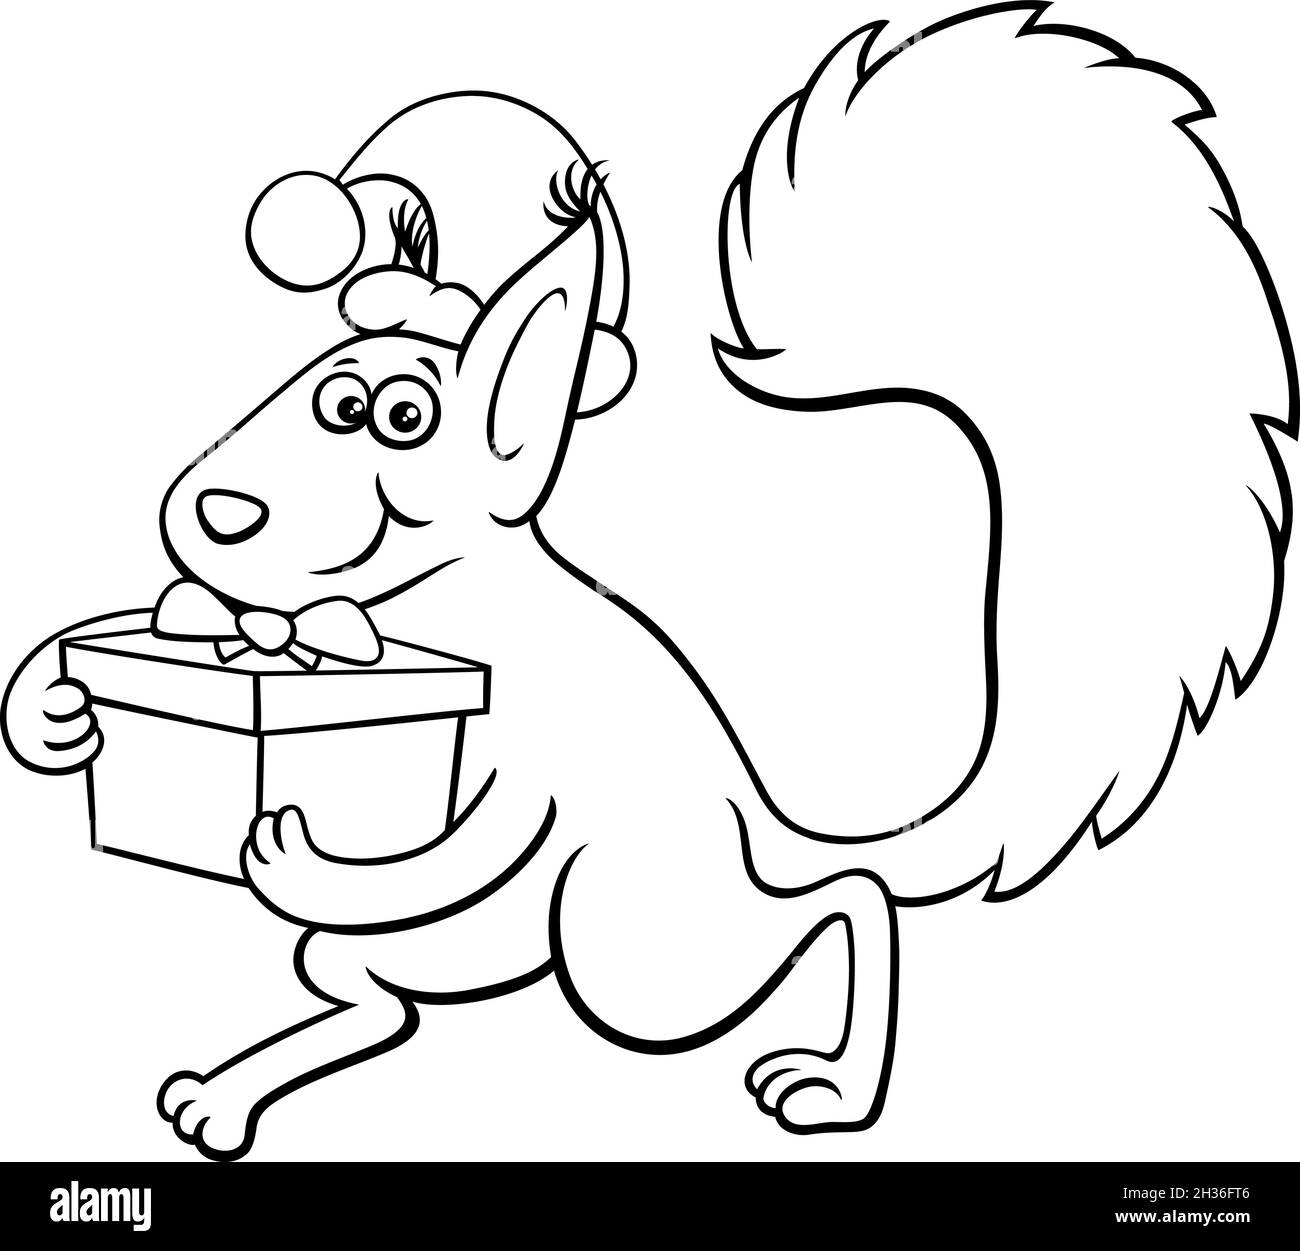 christmas cartoon character coloring pages